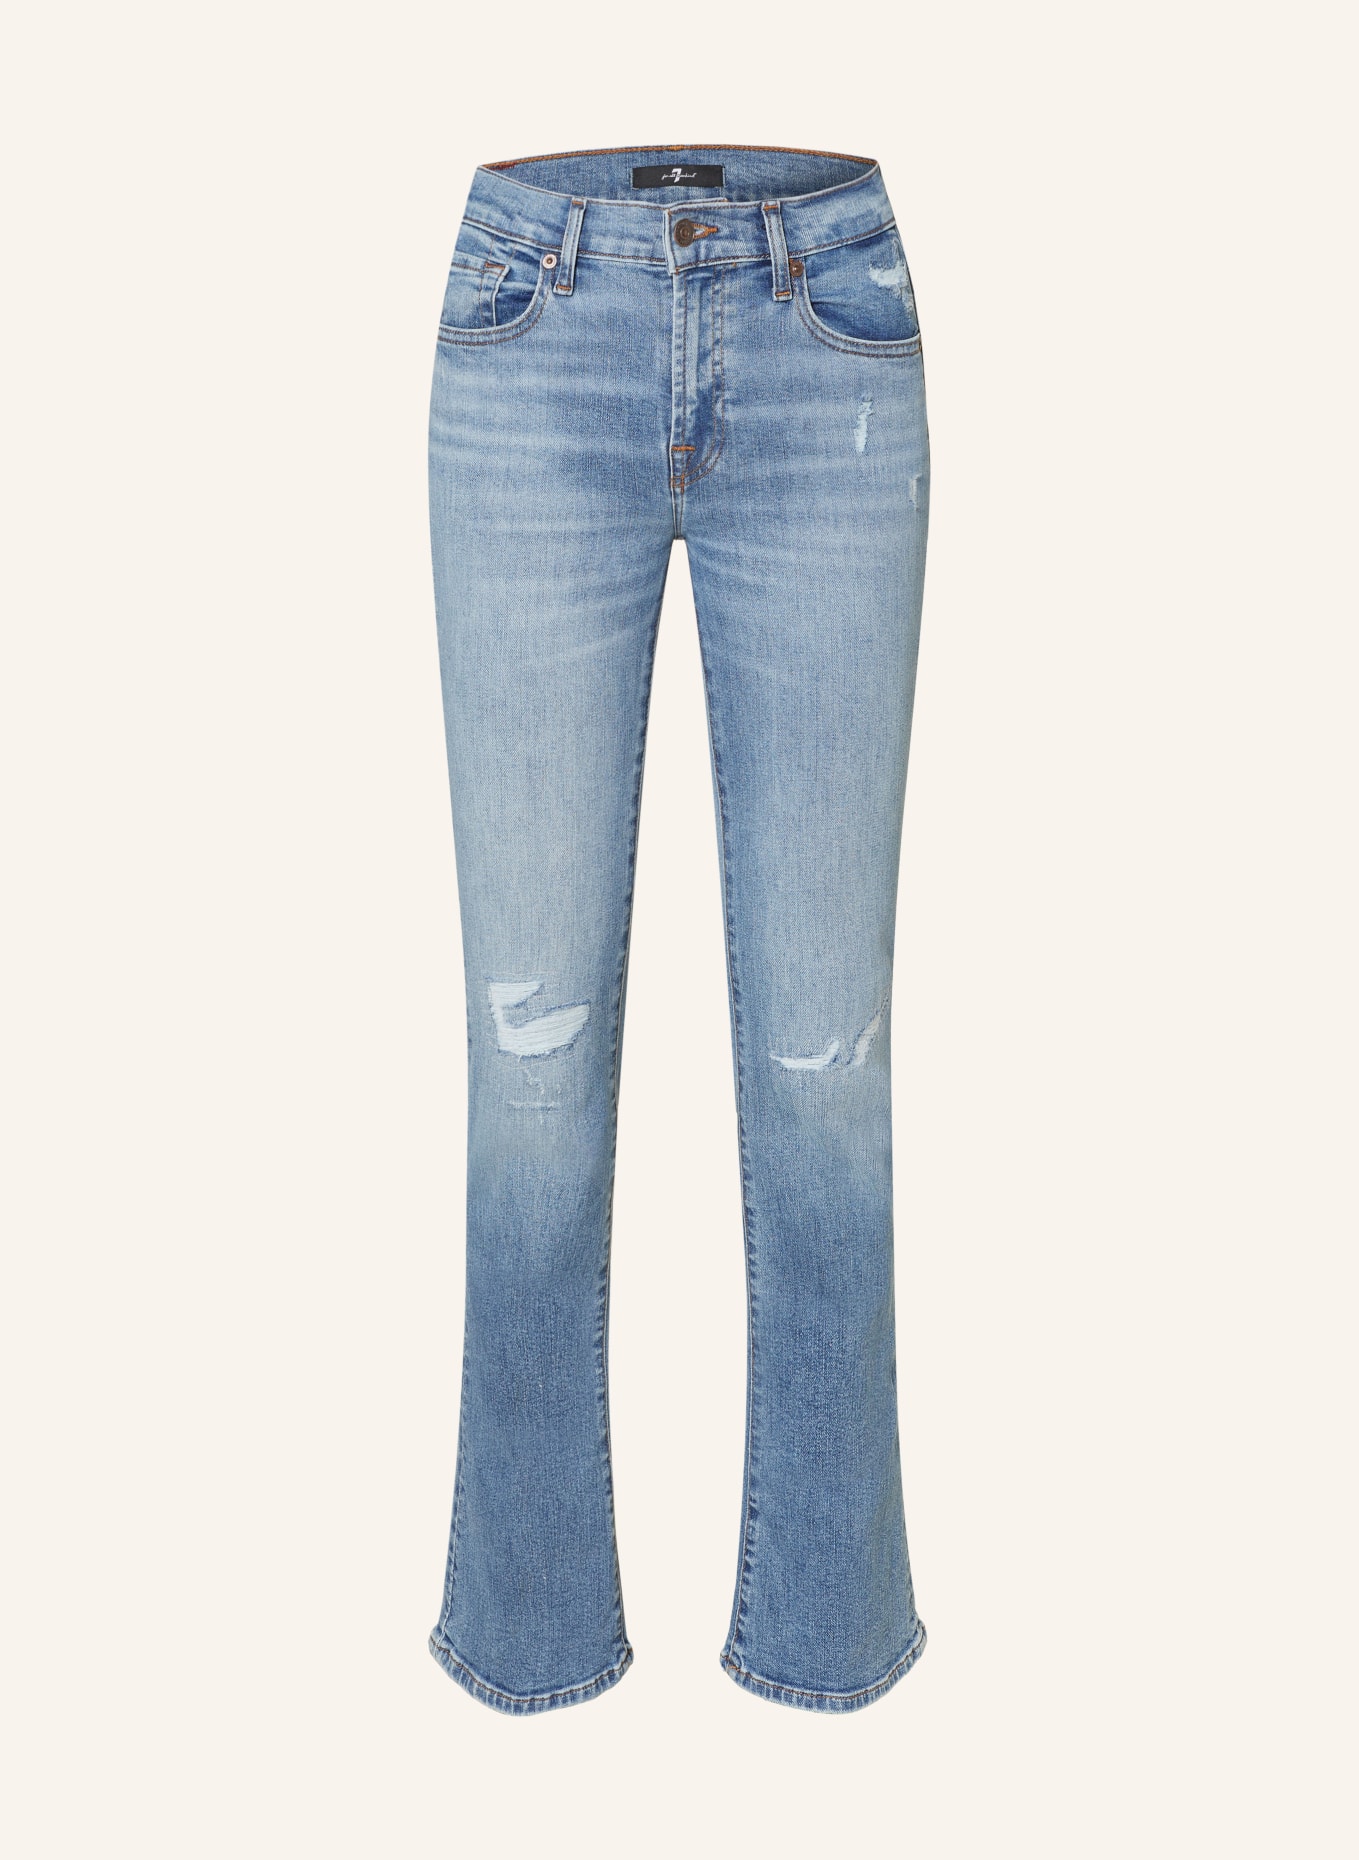 7 for all mankind Destroyed Jeans BOOTCUT TAILORLESS PAYPHONE, Farbe: LIGHT BLUE (Bild 1)